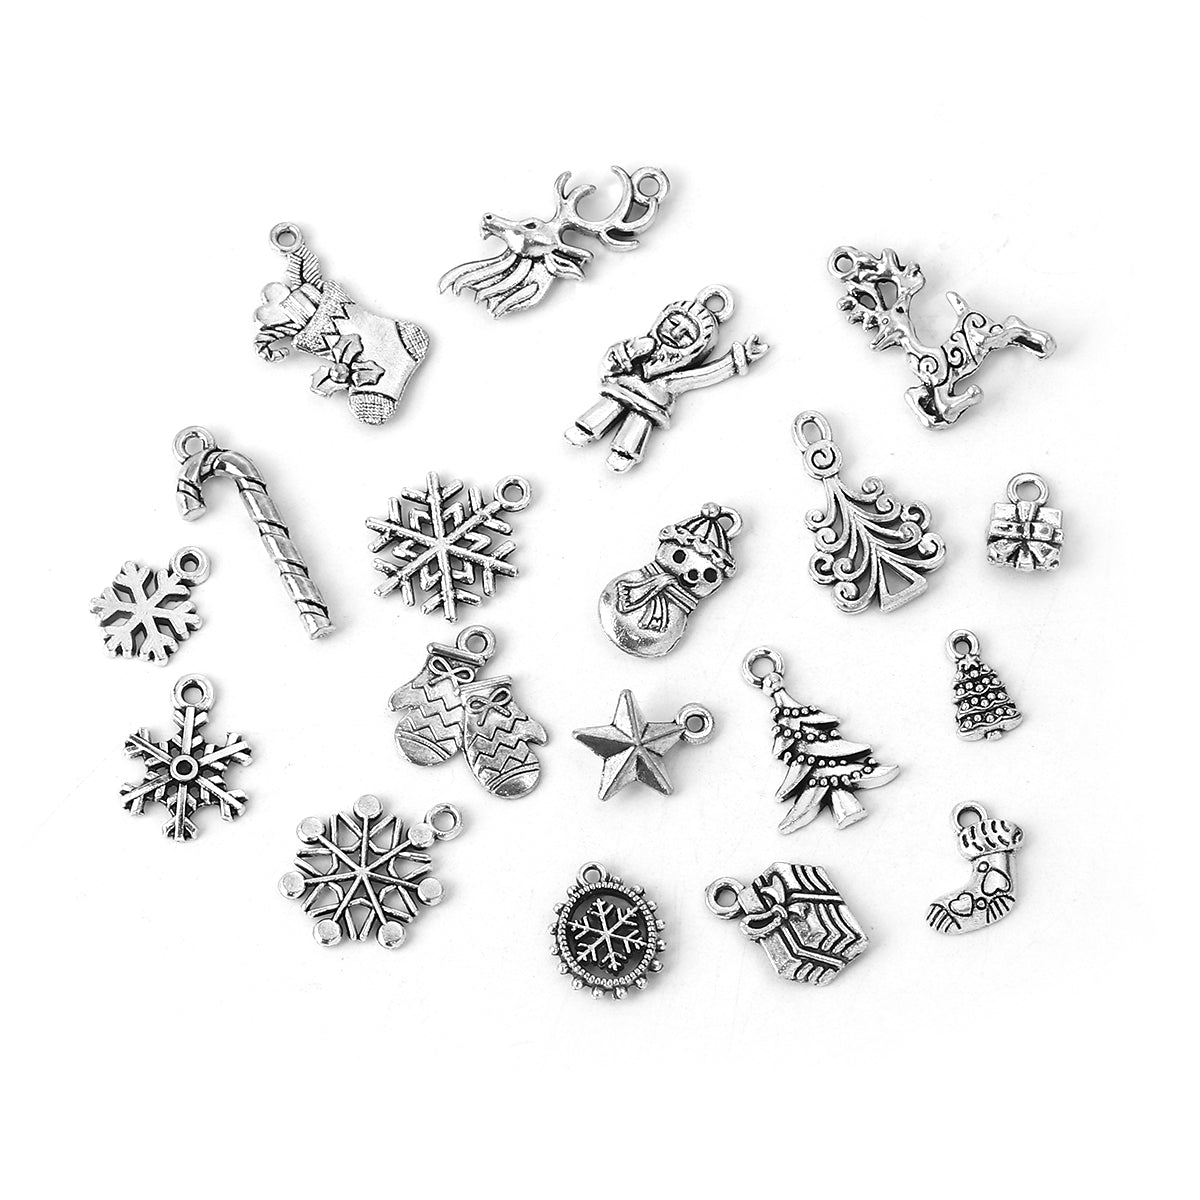 12pcs Silver Witchy Charm Set Wicca Charms Magic Charms Triple Goddess  Stainless Steel -  Norway